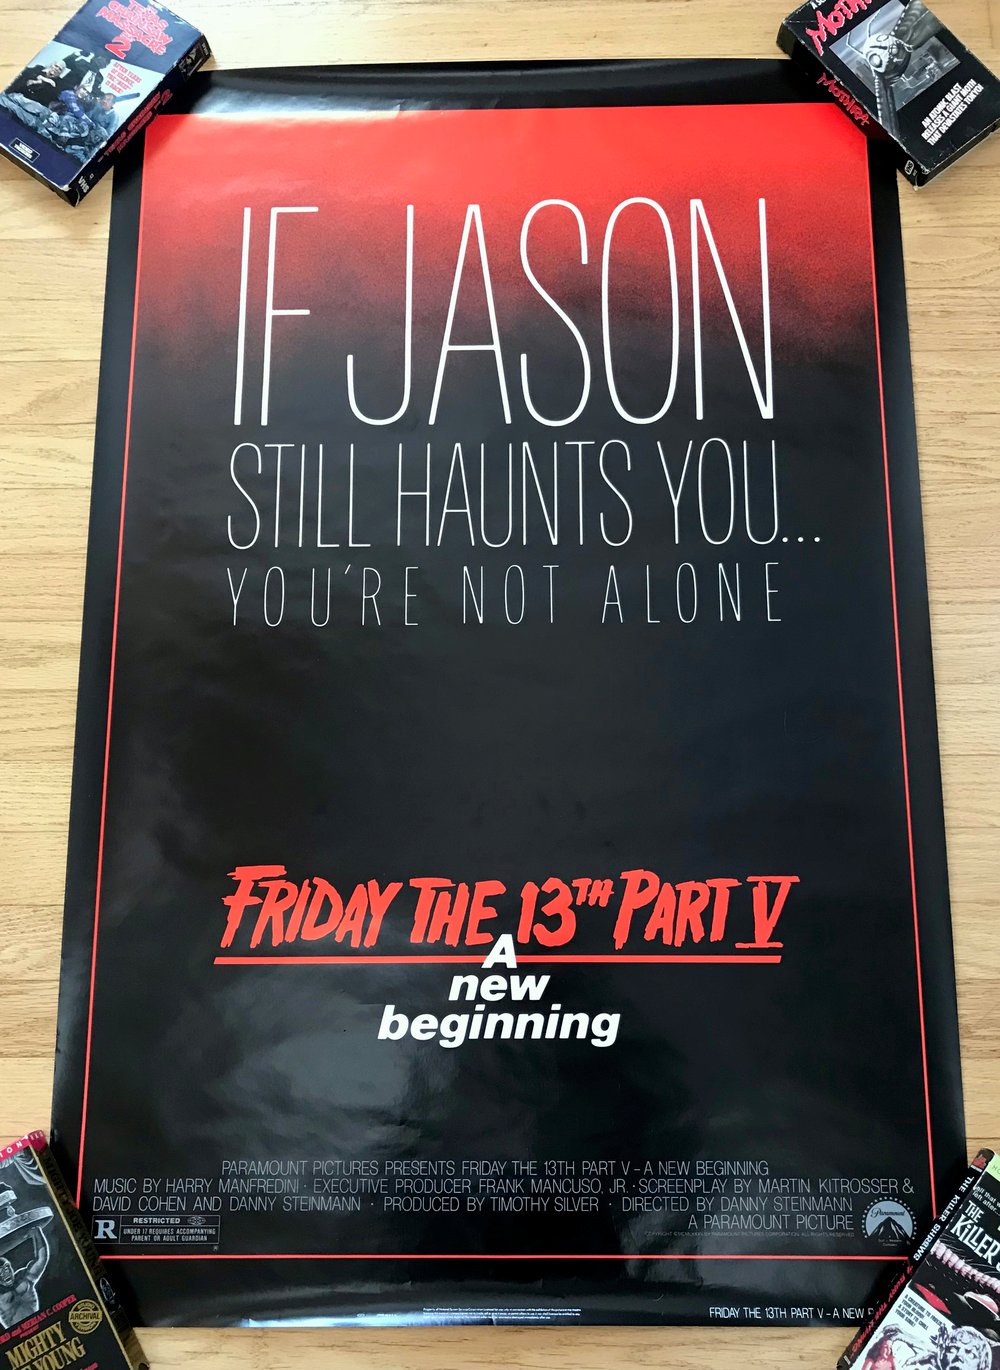 1985 FRIDAY THE 13TH PART V: A NEW BEGINNING Original U.S. One Sheet Movie Poster